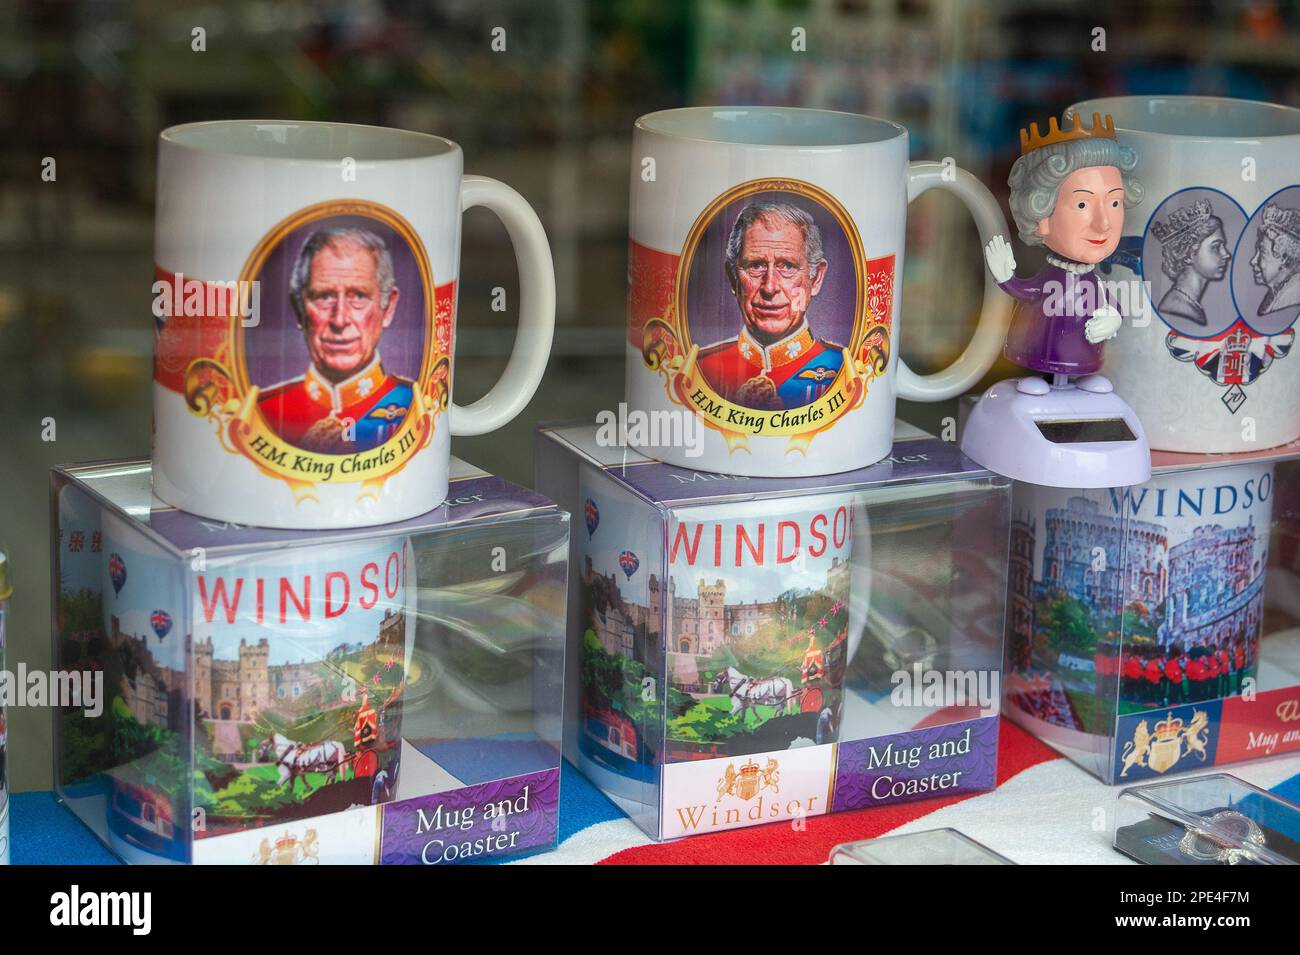 Windsor, Berkshire, UK. 15th March, 2023. The town of Windsor is gearing up for the Coronation of King Charles III. A concert is to be held in the grounds of Windsor Castle on Sunday 7th May 2023. Tourist shops are starting to sell King Charles III Cornonation memorabilia. Credit: Maureen McLean/Alamy Live News Stock Photo